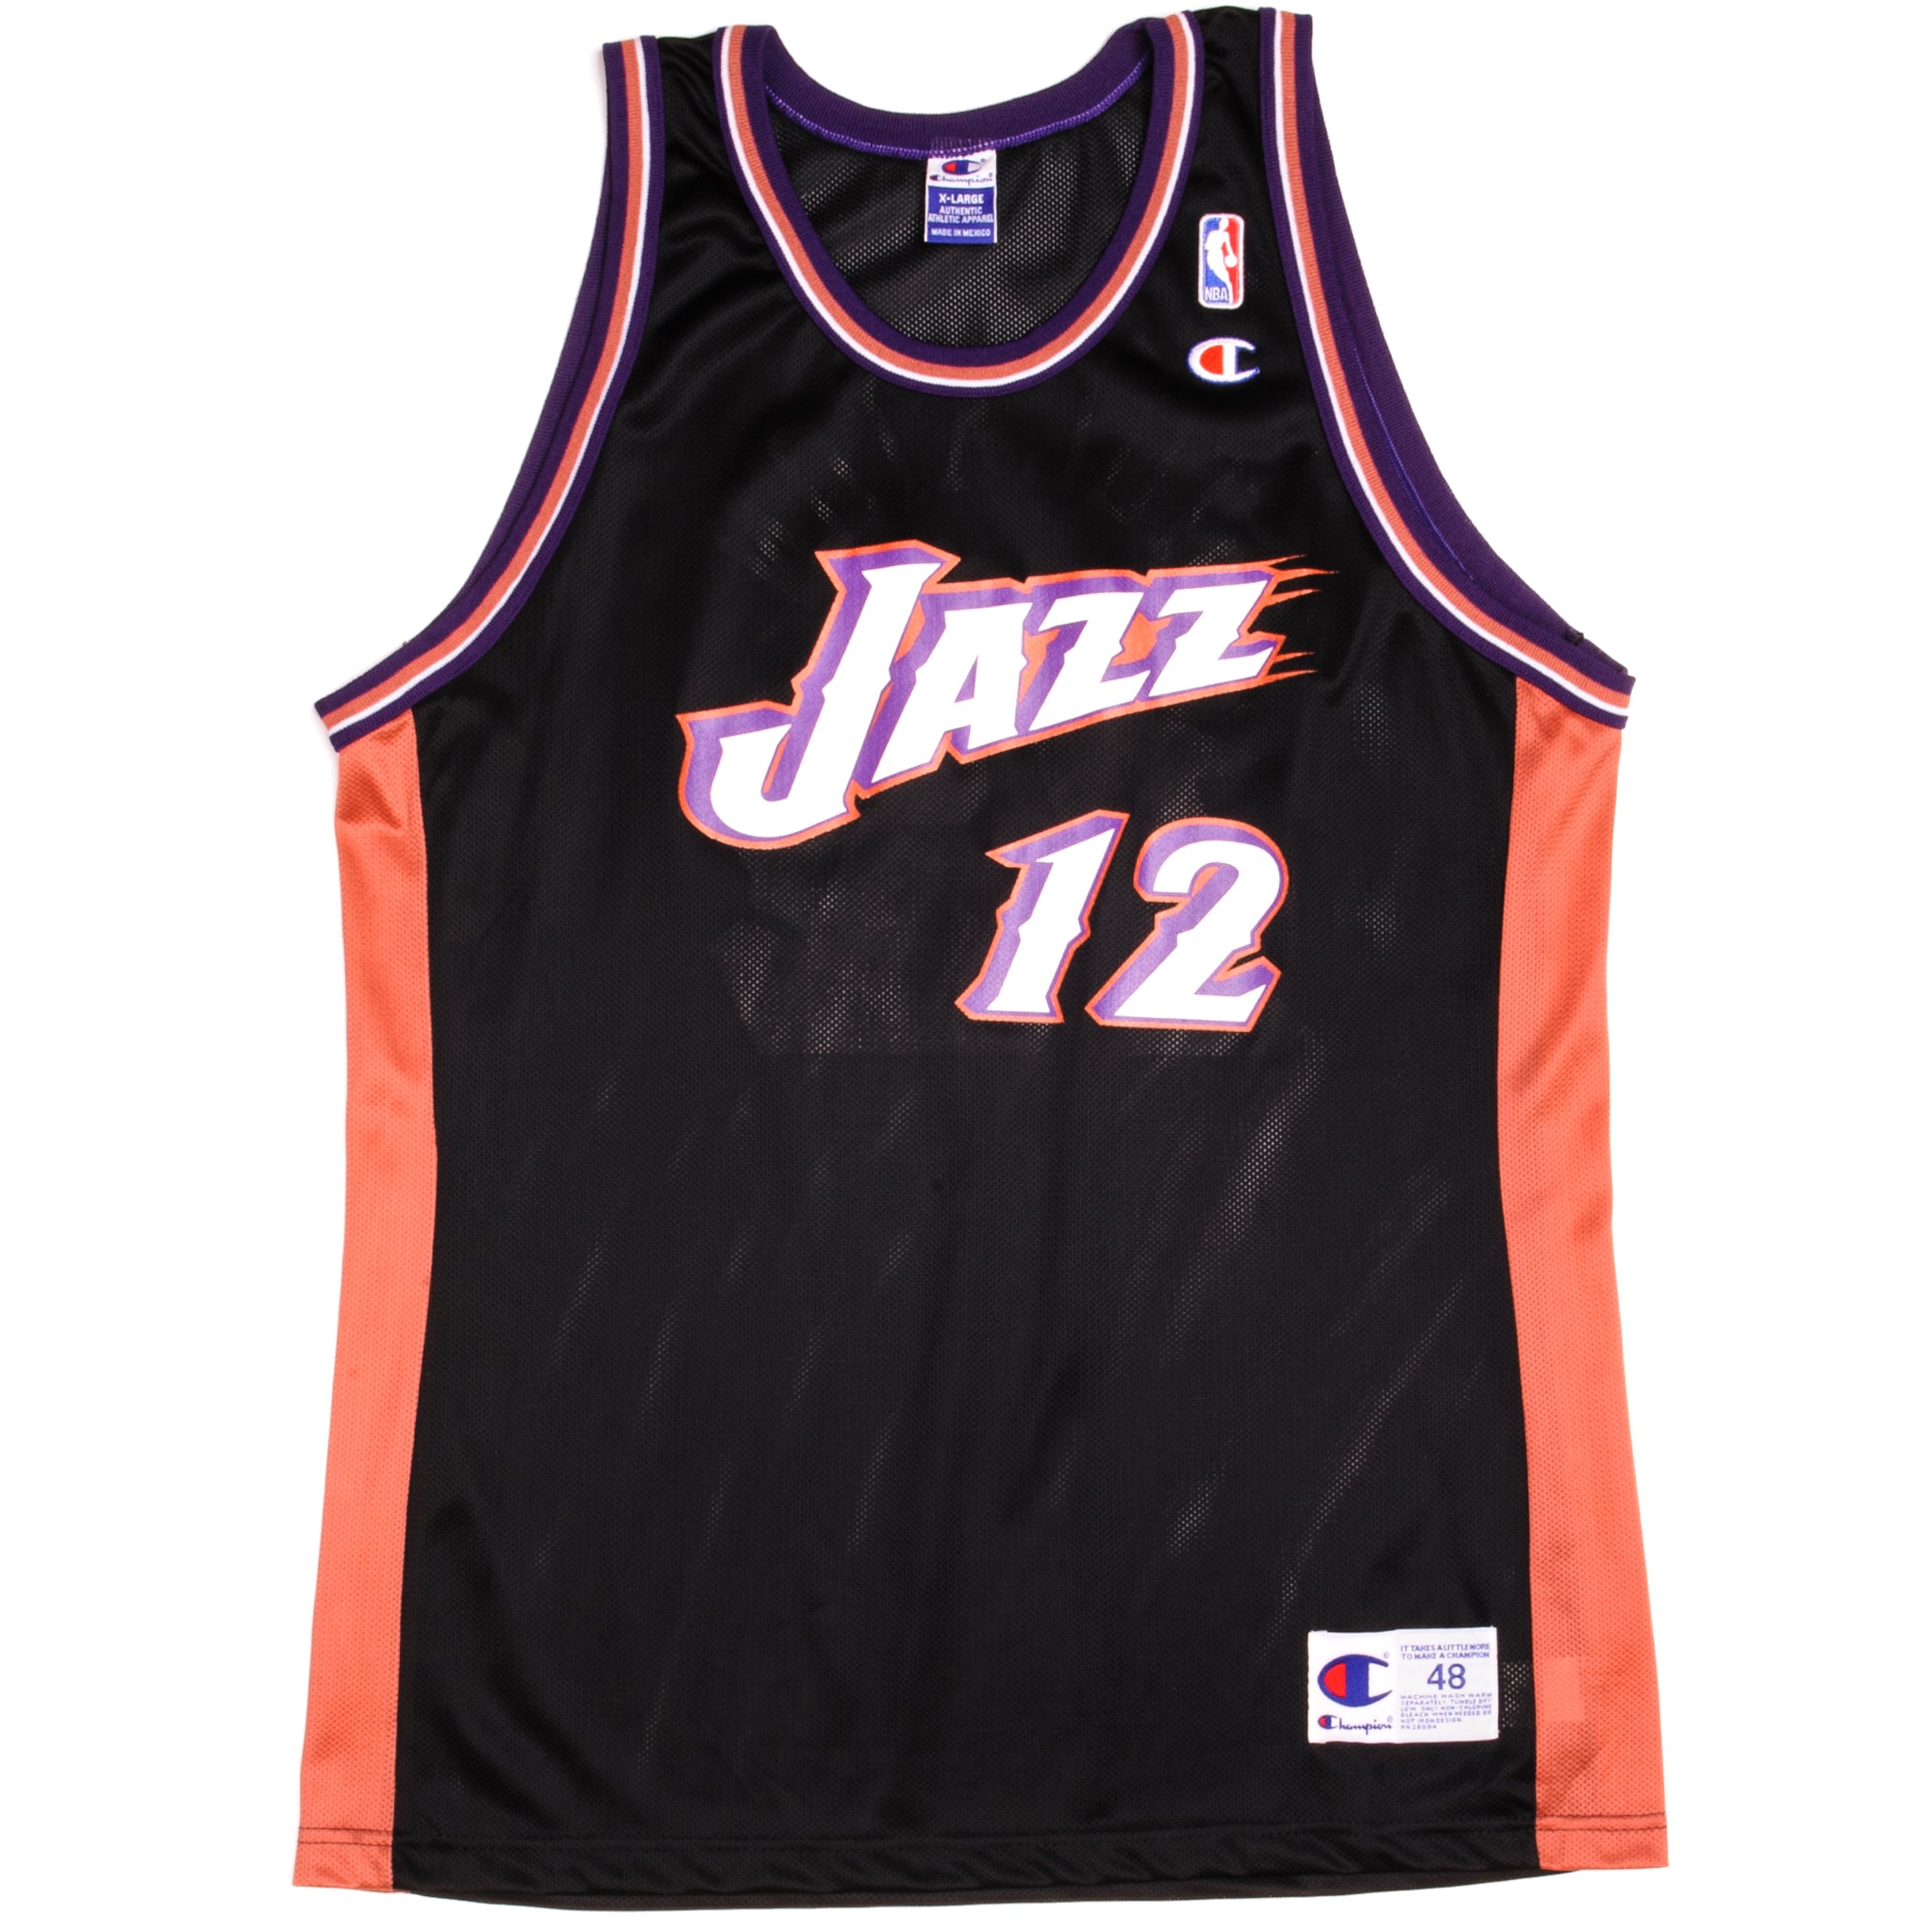 The History and Evolution of the Utah Jazz NBA Basketball Jersey